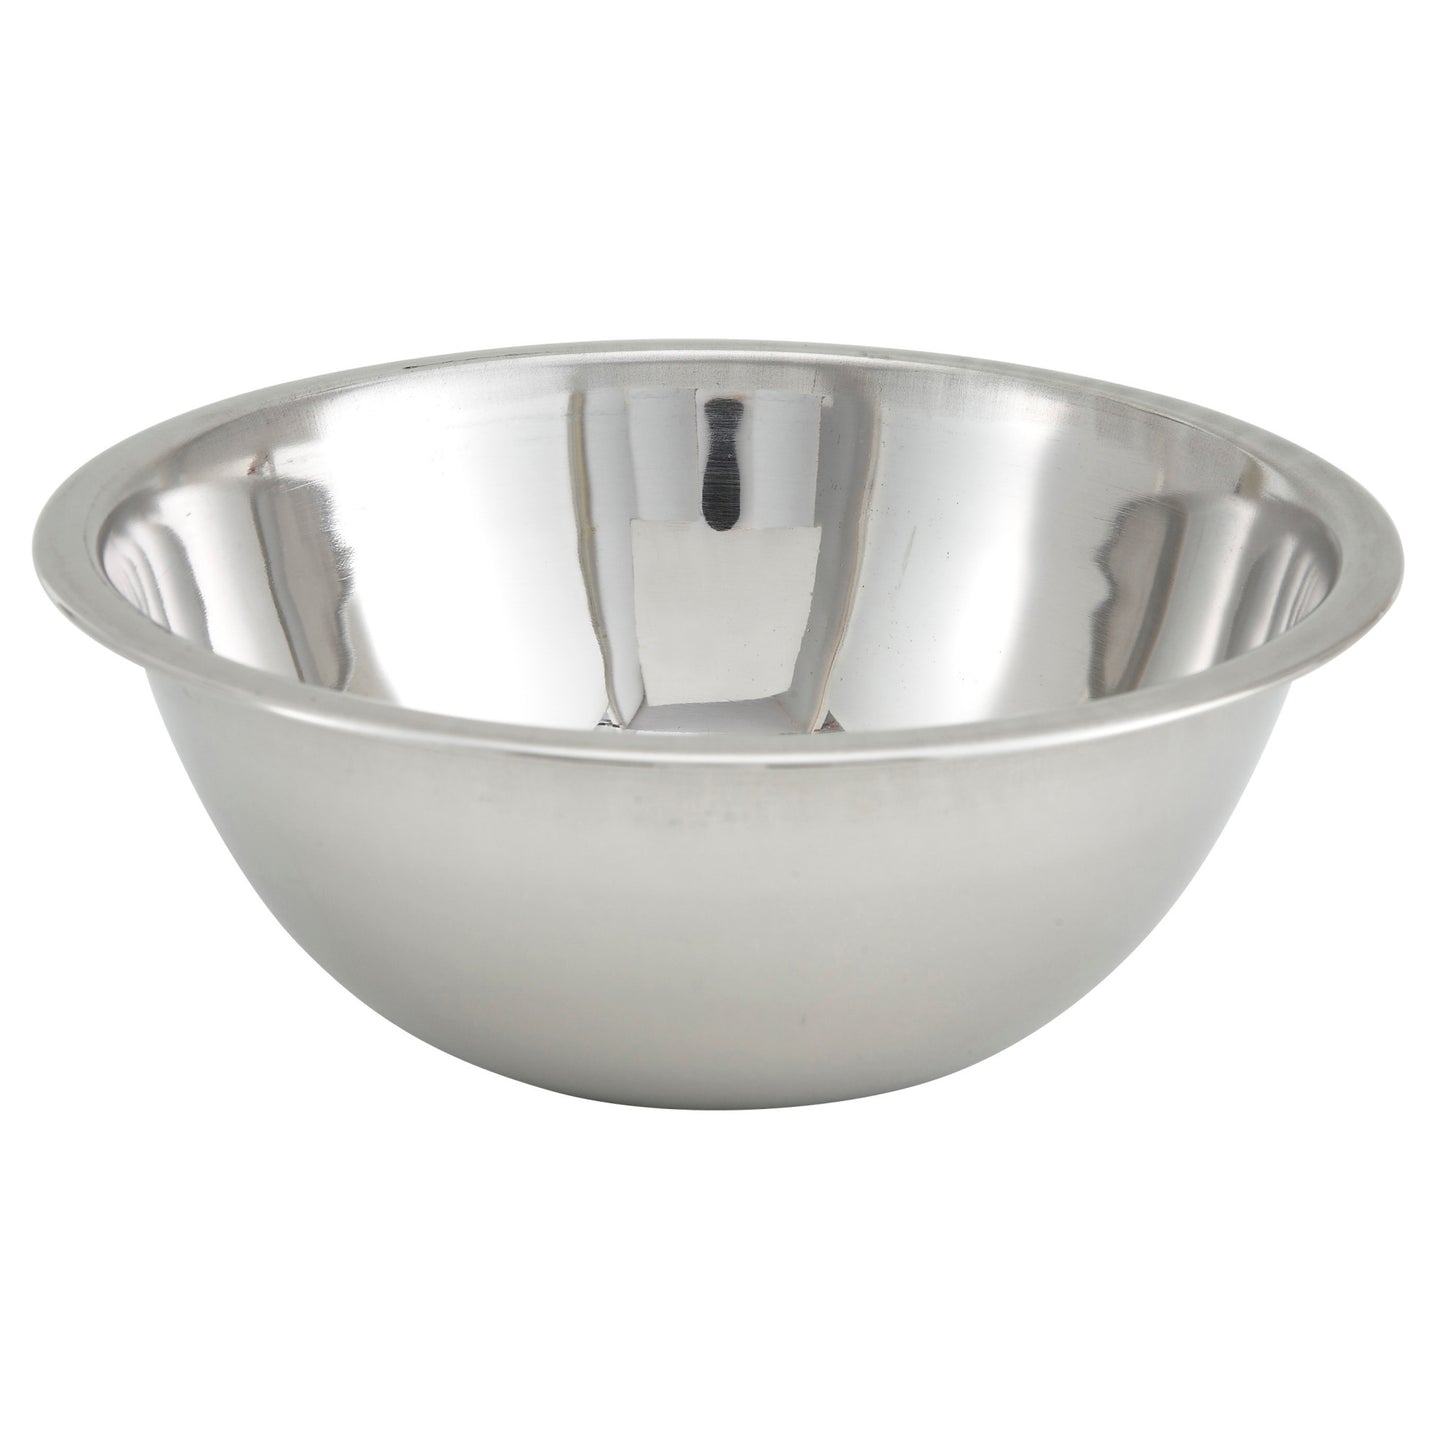 MXBT-400Q - All-Purpose True Capacity Mixing Bowl, Stainless Steel - 4 Quart